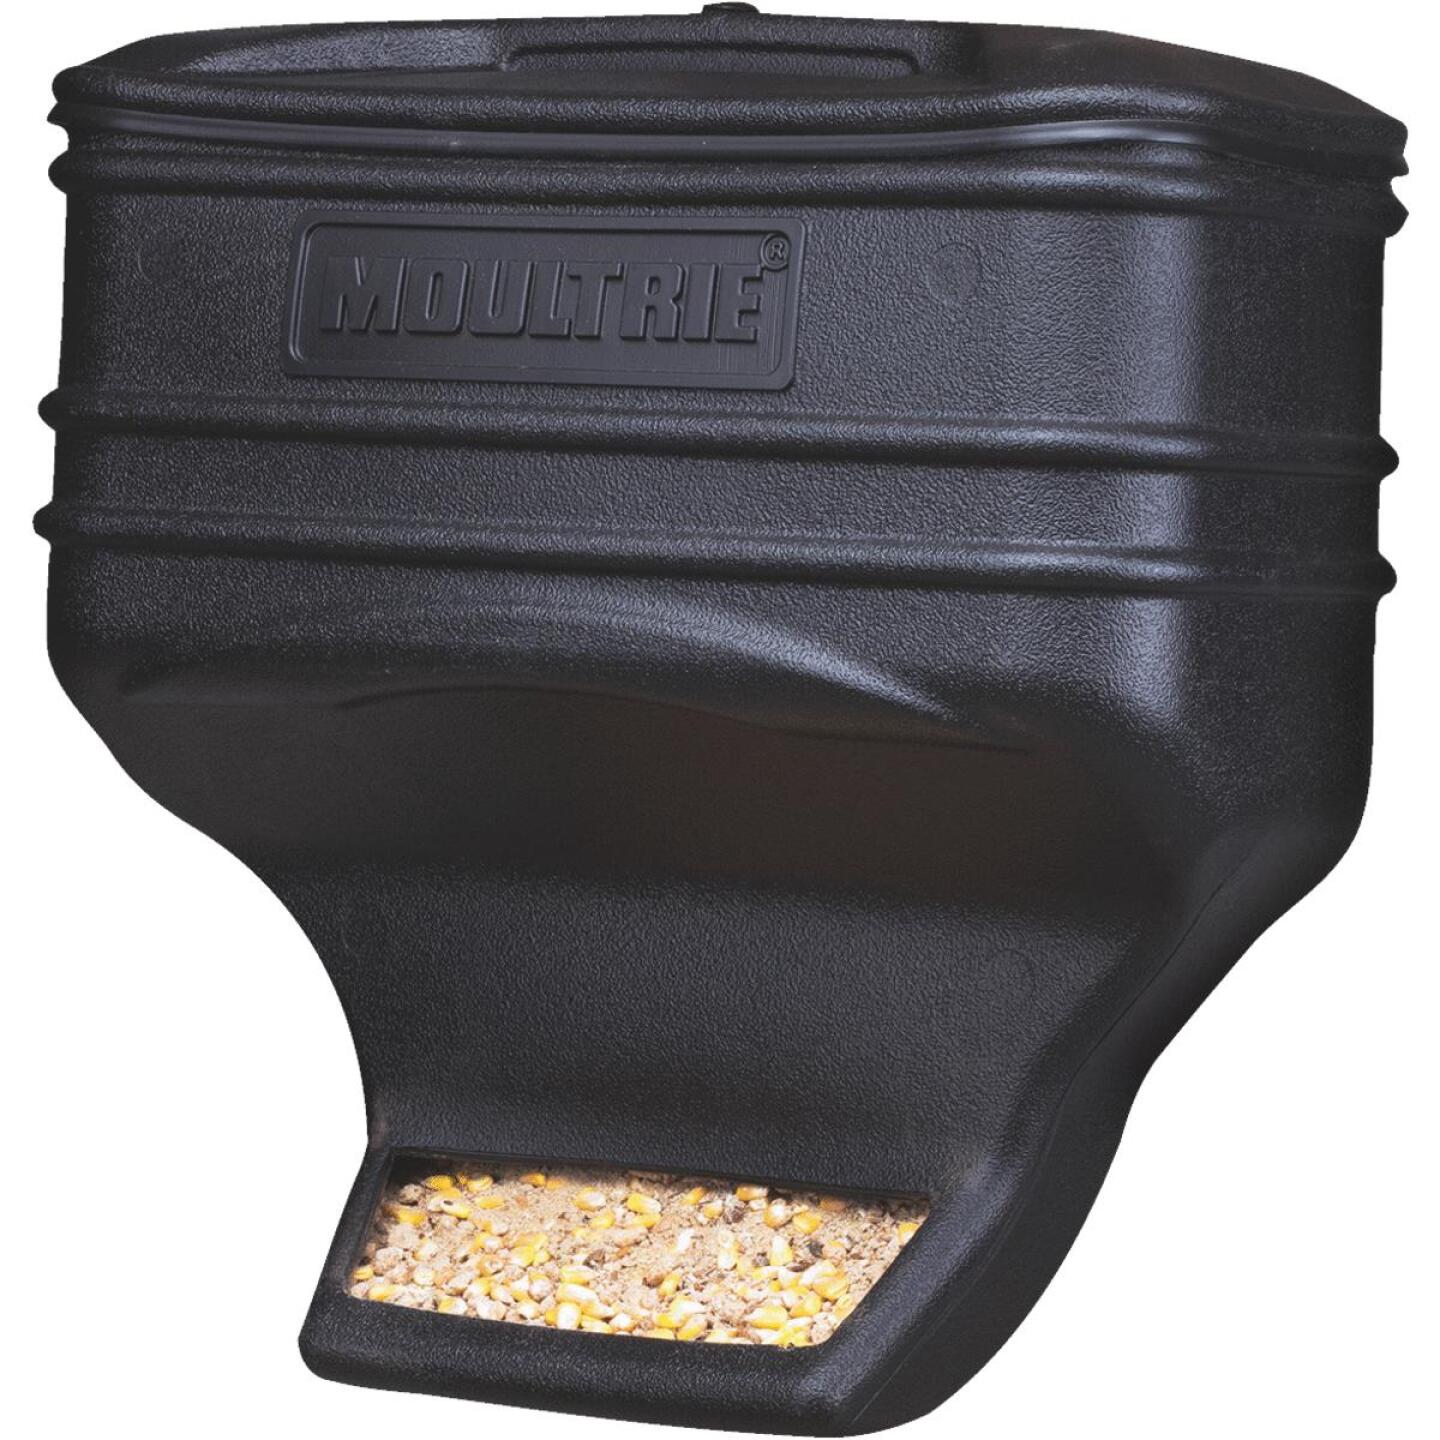 Moultrie, Moultrie 40 Lb. Feed Station Gravity Deer Feeder